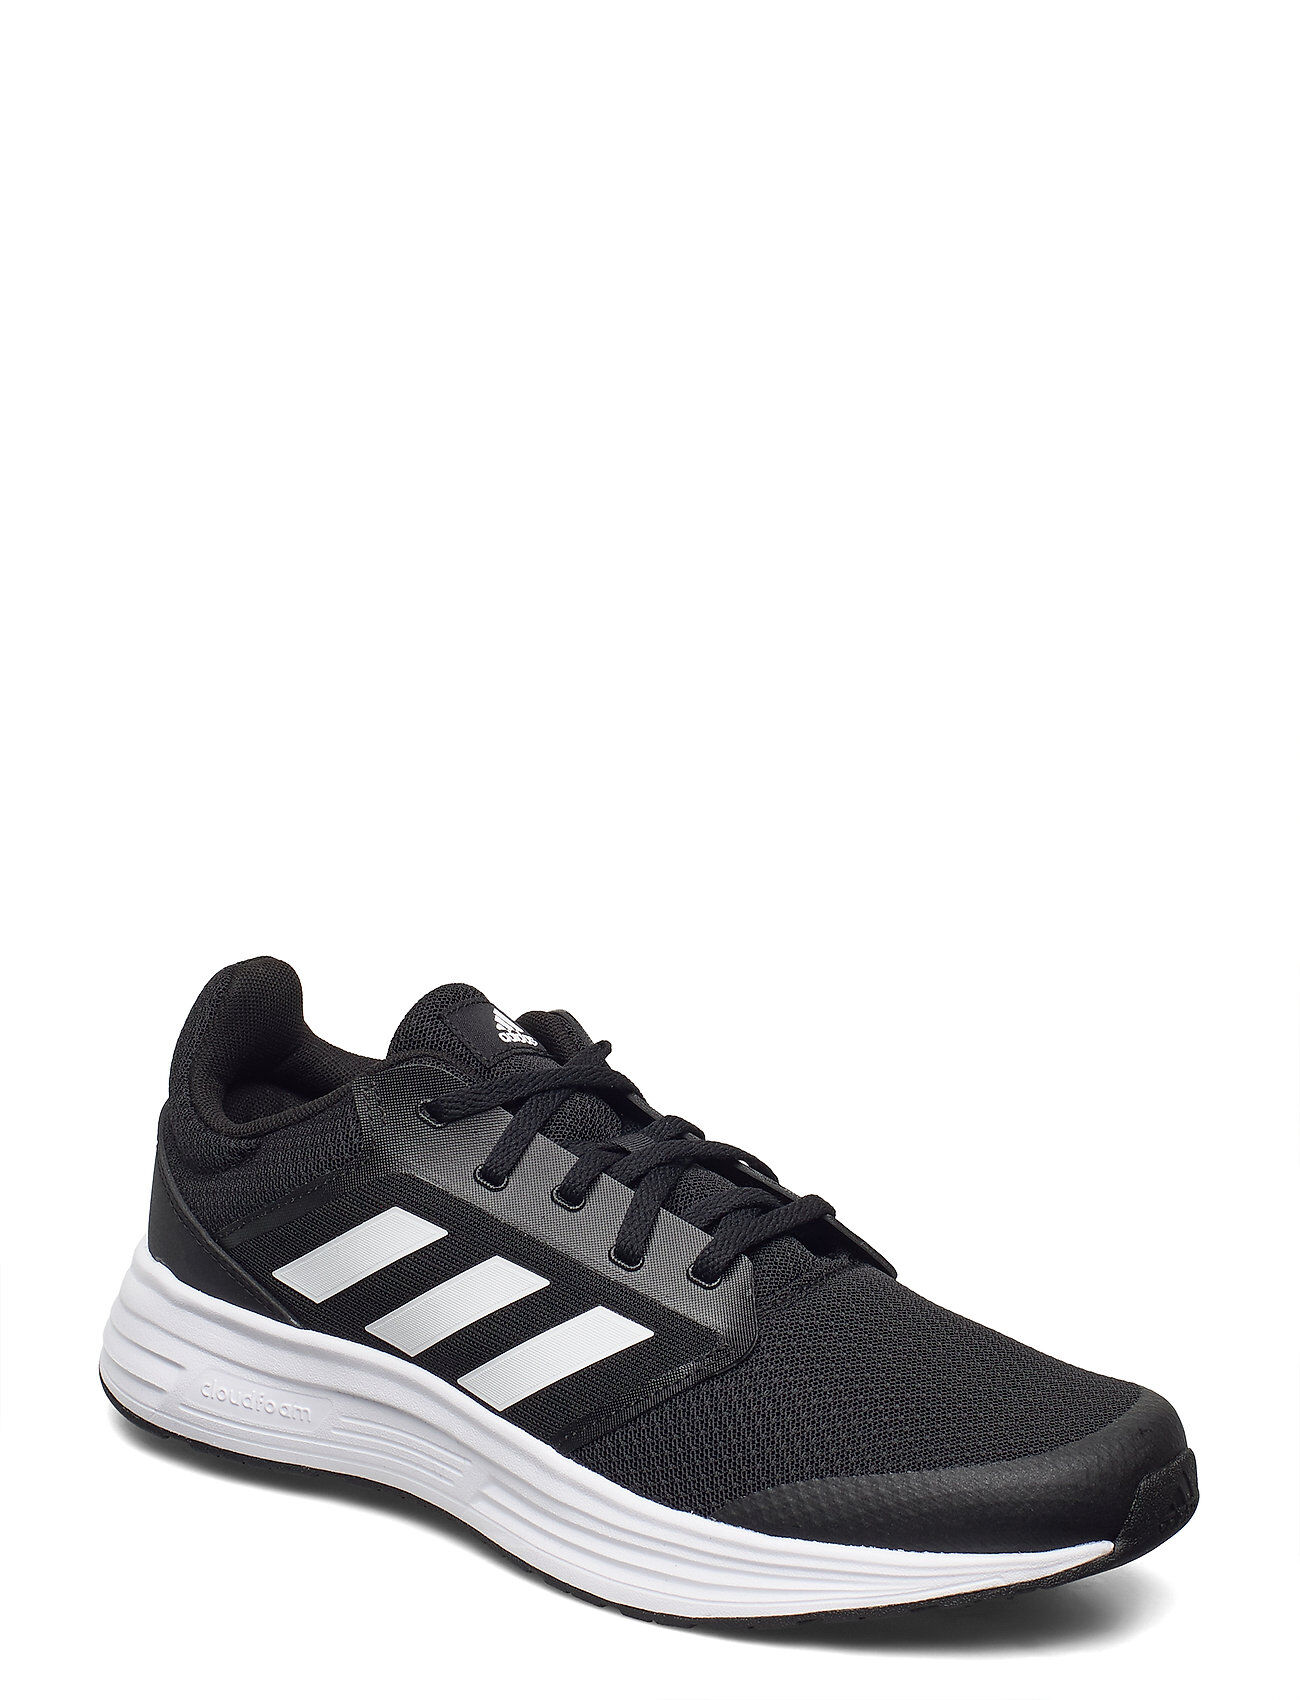 adidas Performance Galaxy 5 Shoes Sport Shoes Running Shoes Svart Adidas Performance